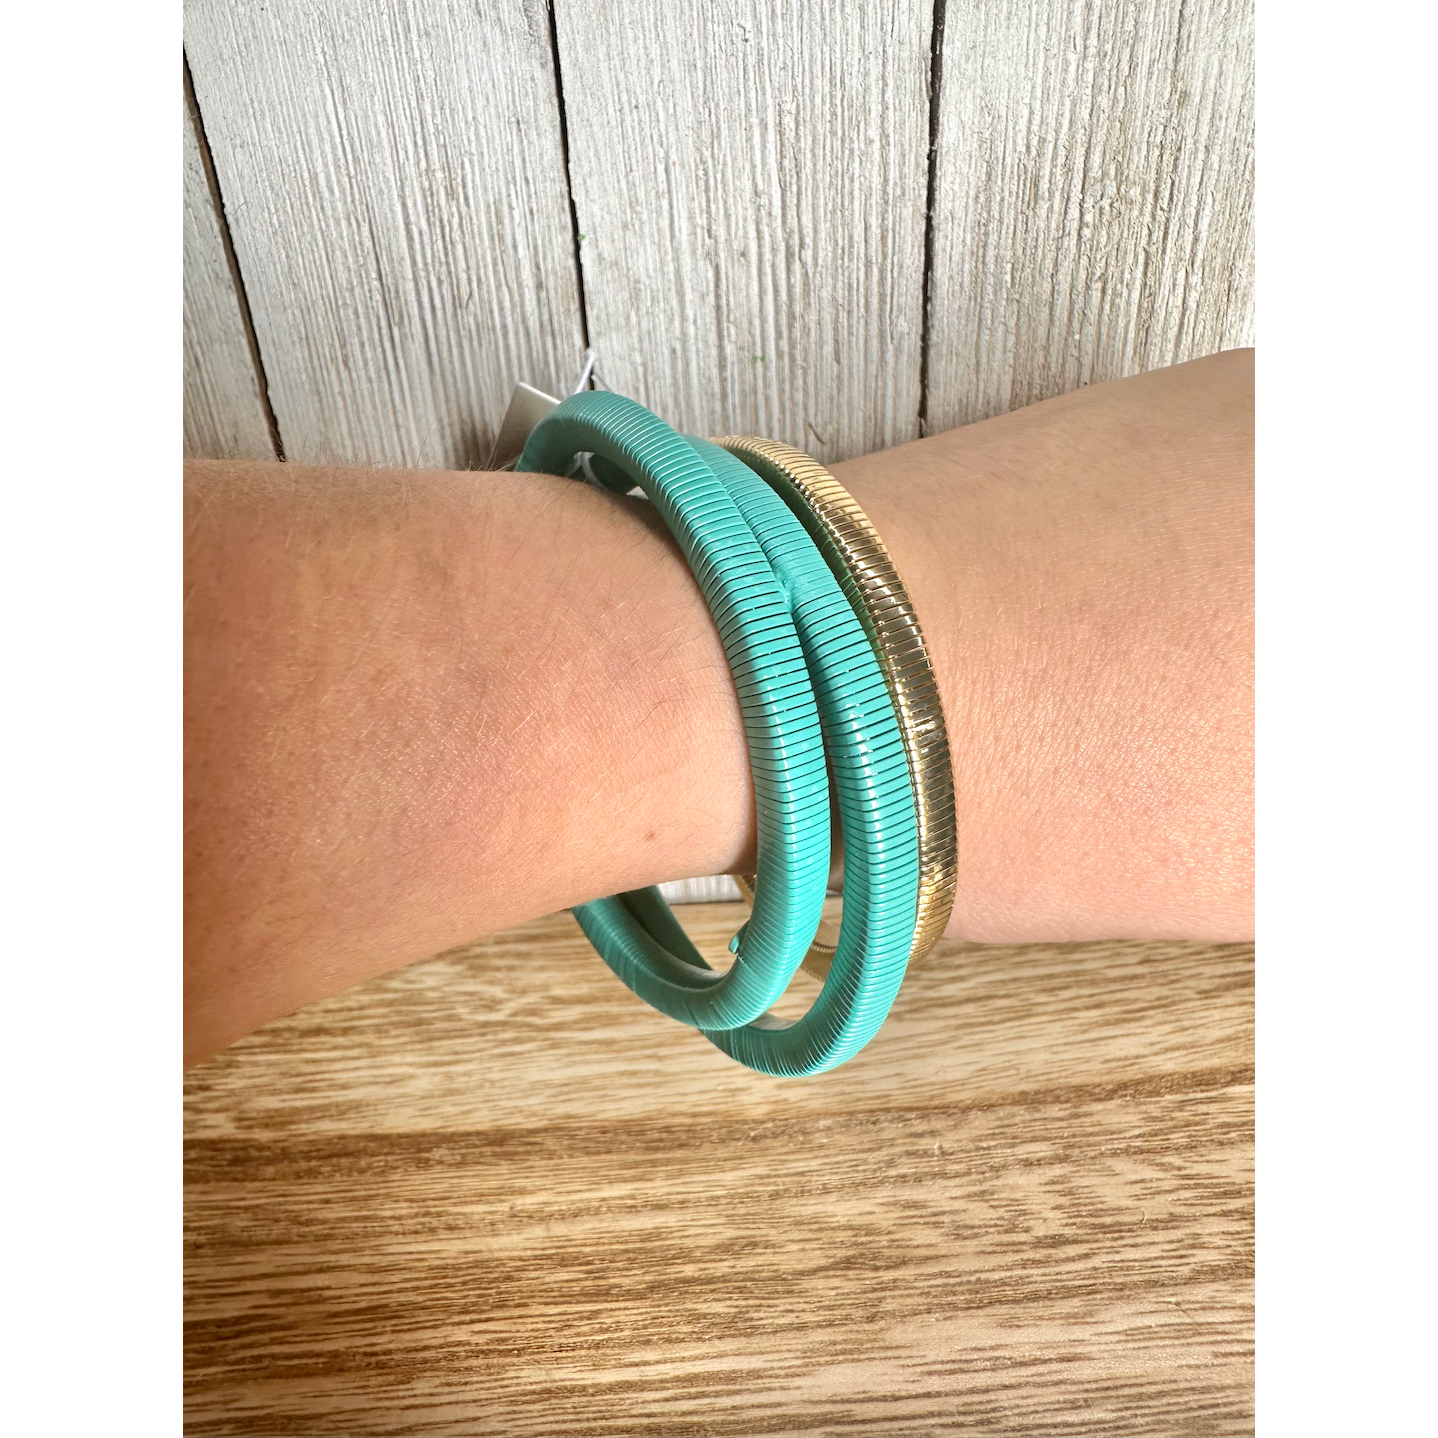 Teal and Gold Set of 3 Wired Stretch Bracelets